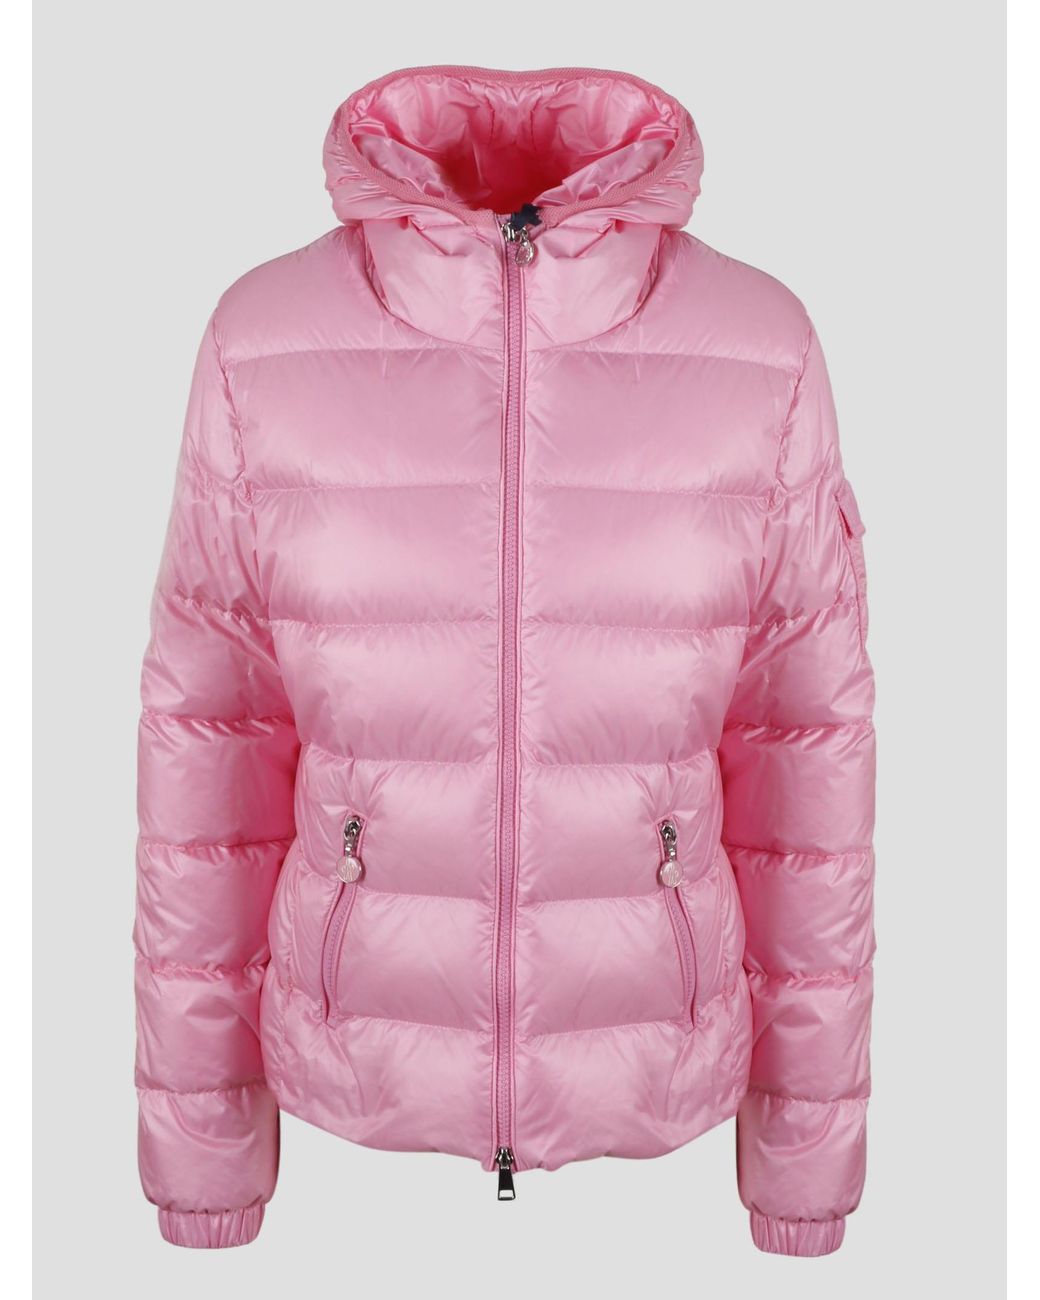 Moncler Gles Short Down Jacket in Pink | Lyst